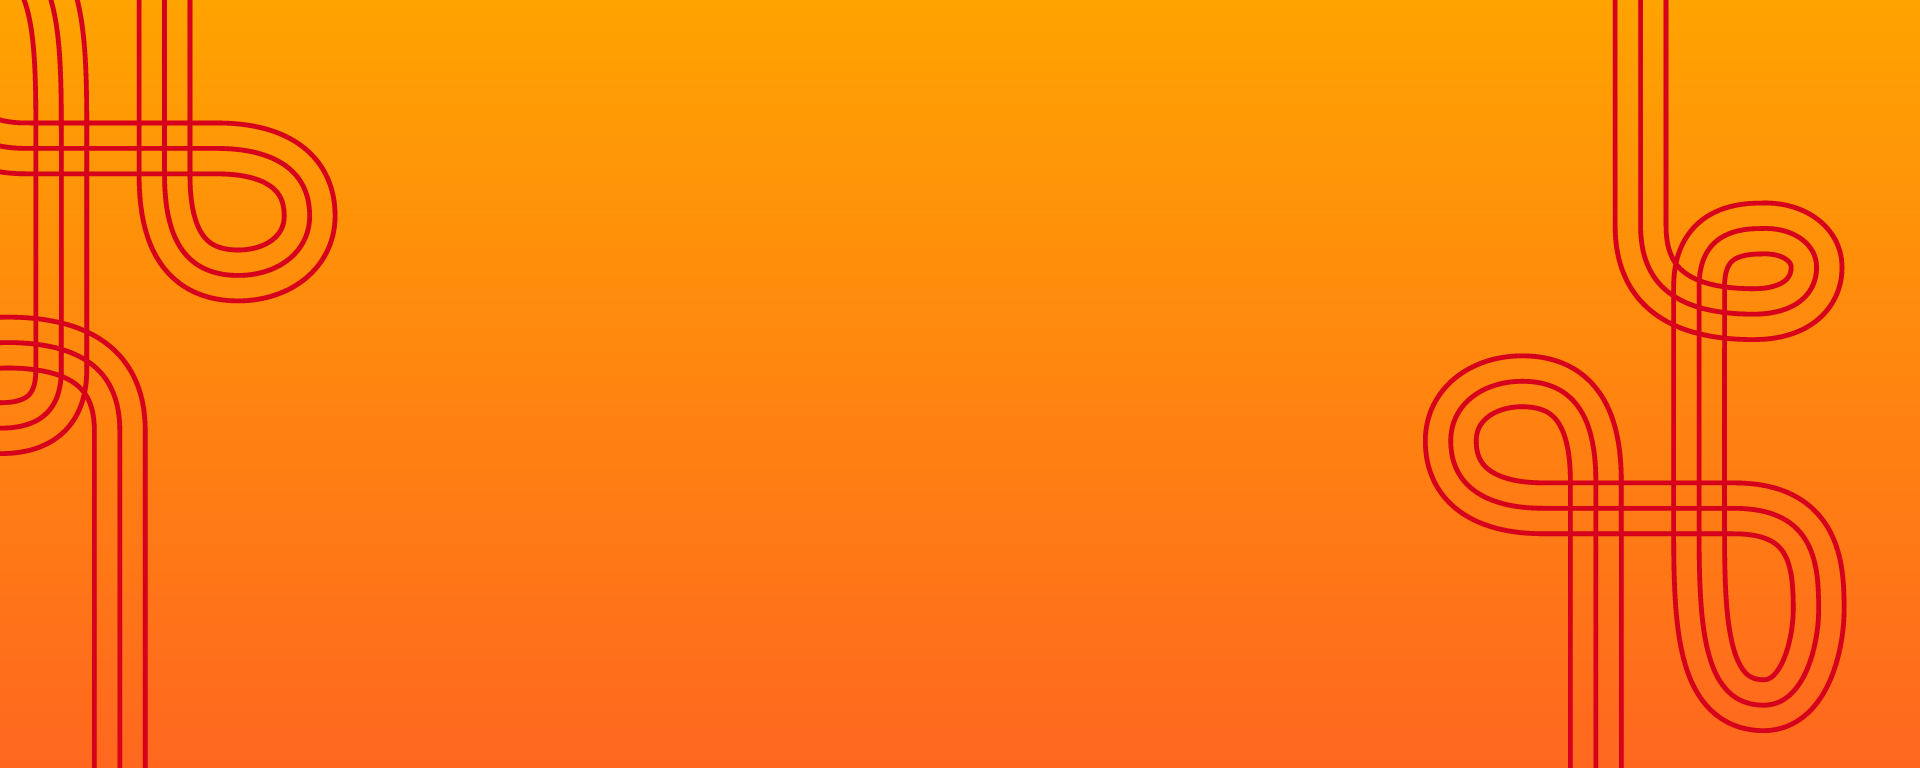 Orange background with red swirly lines on top